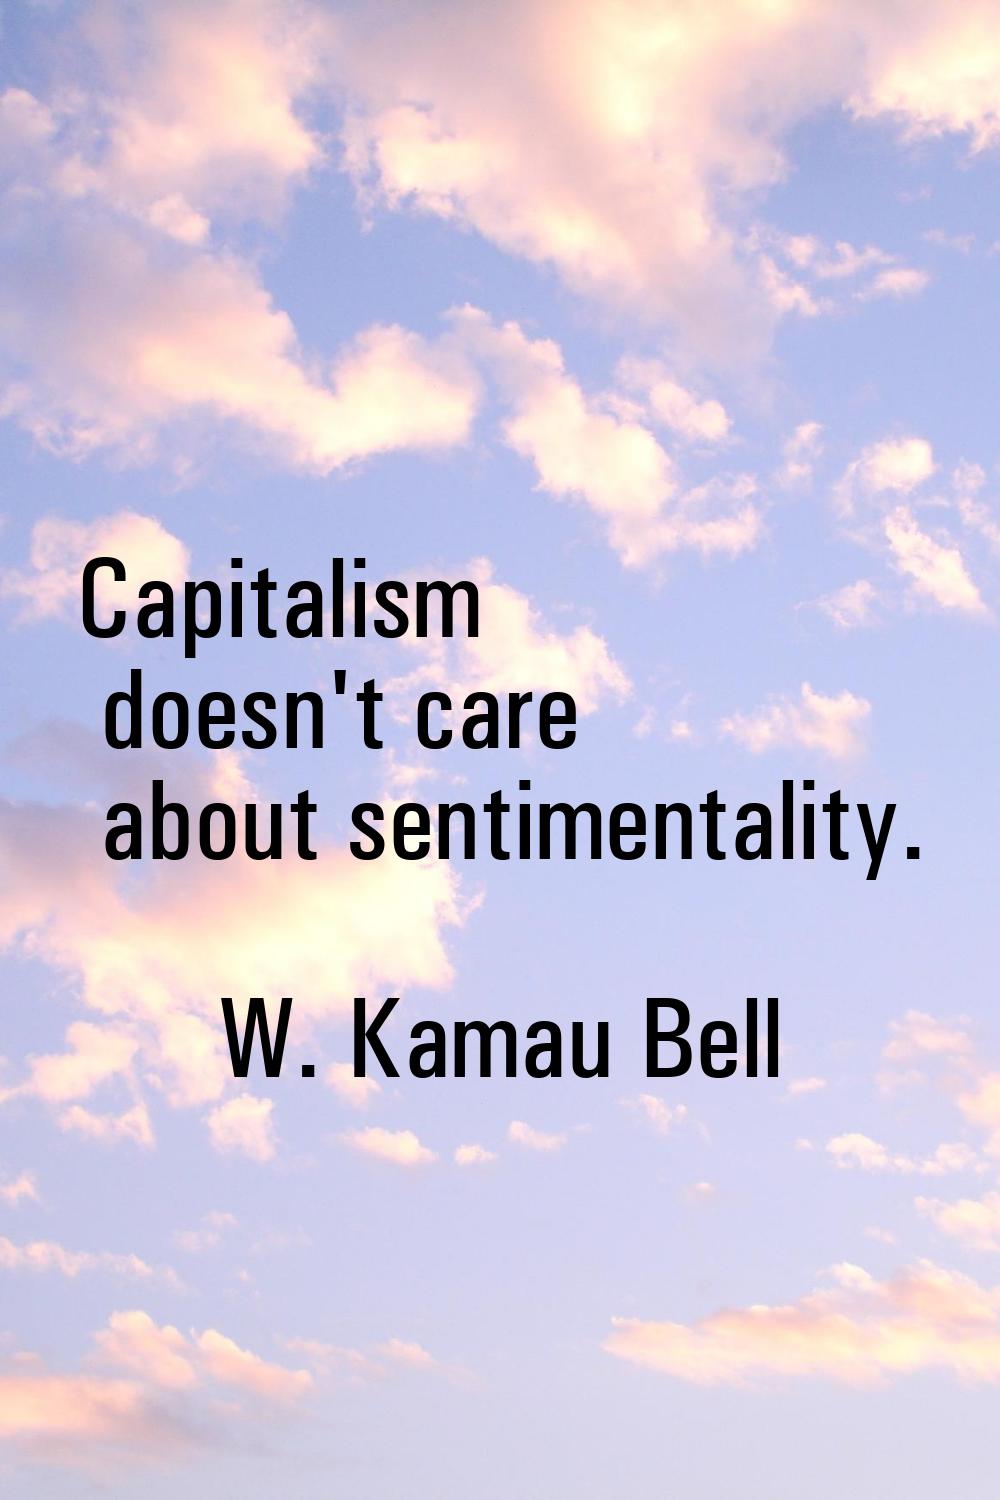 Capitalism doesn't care about sentimentality.